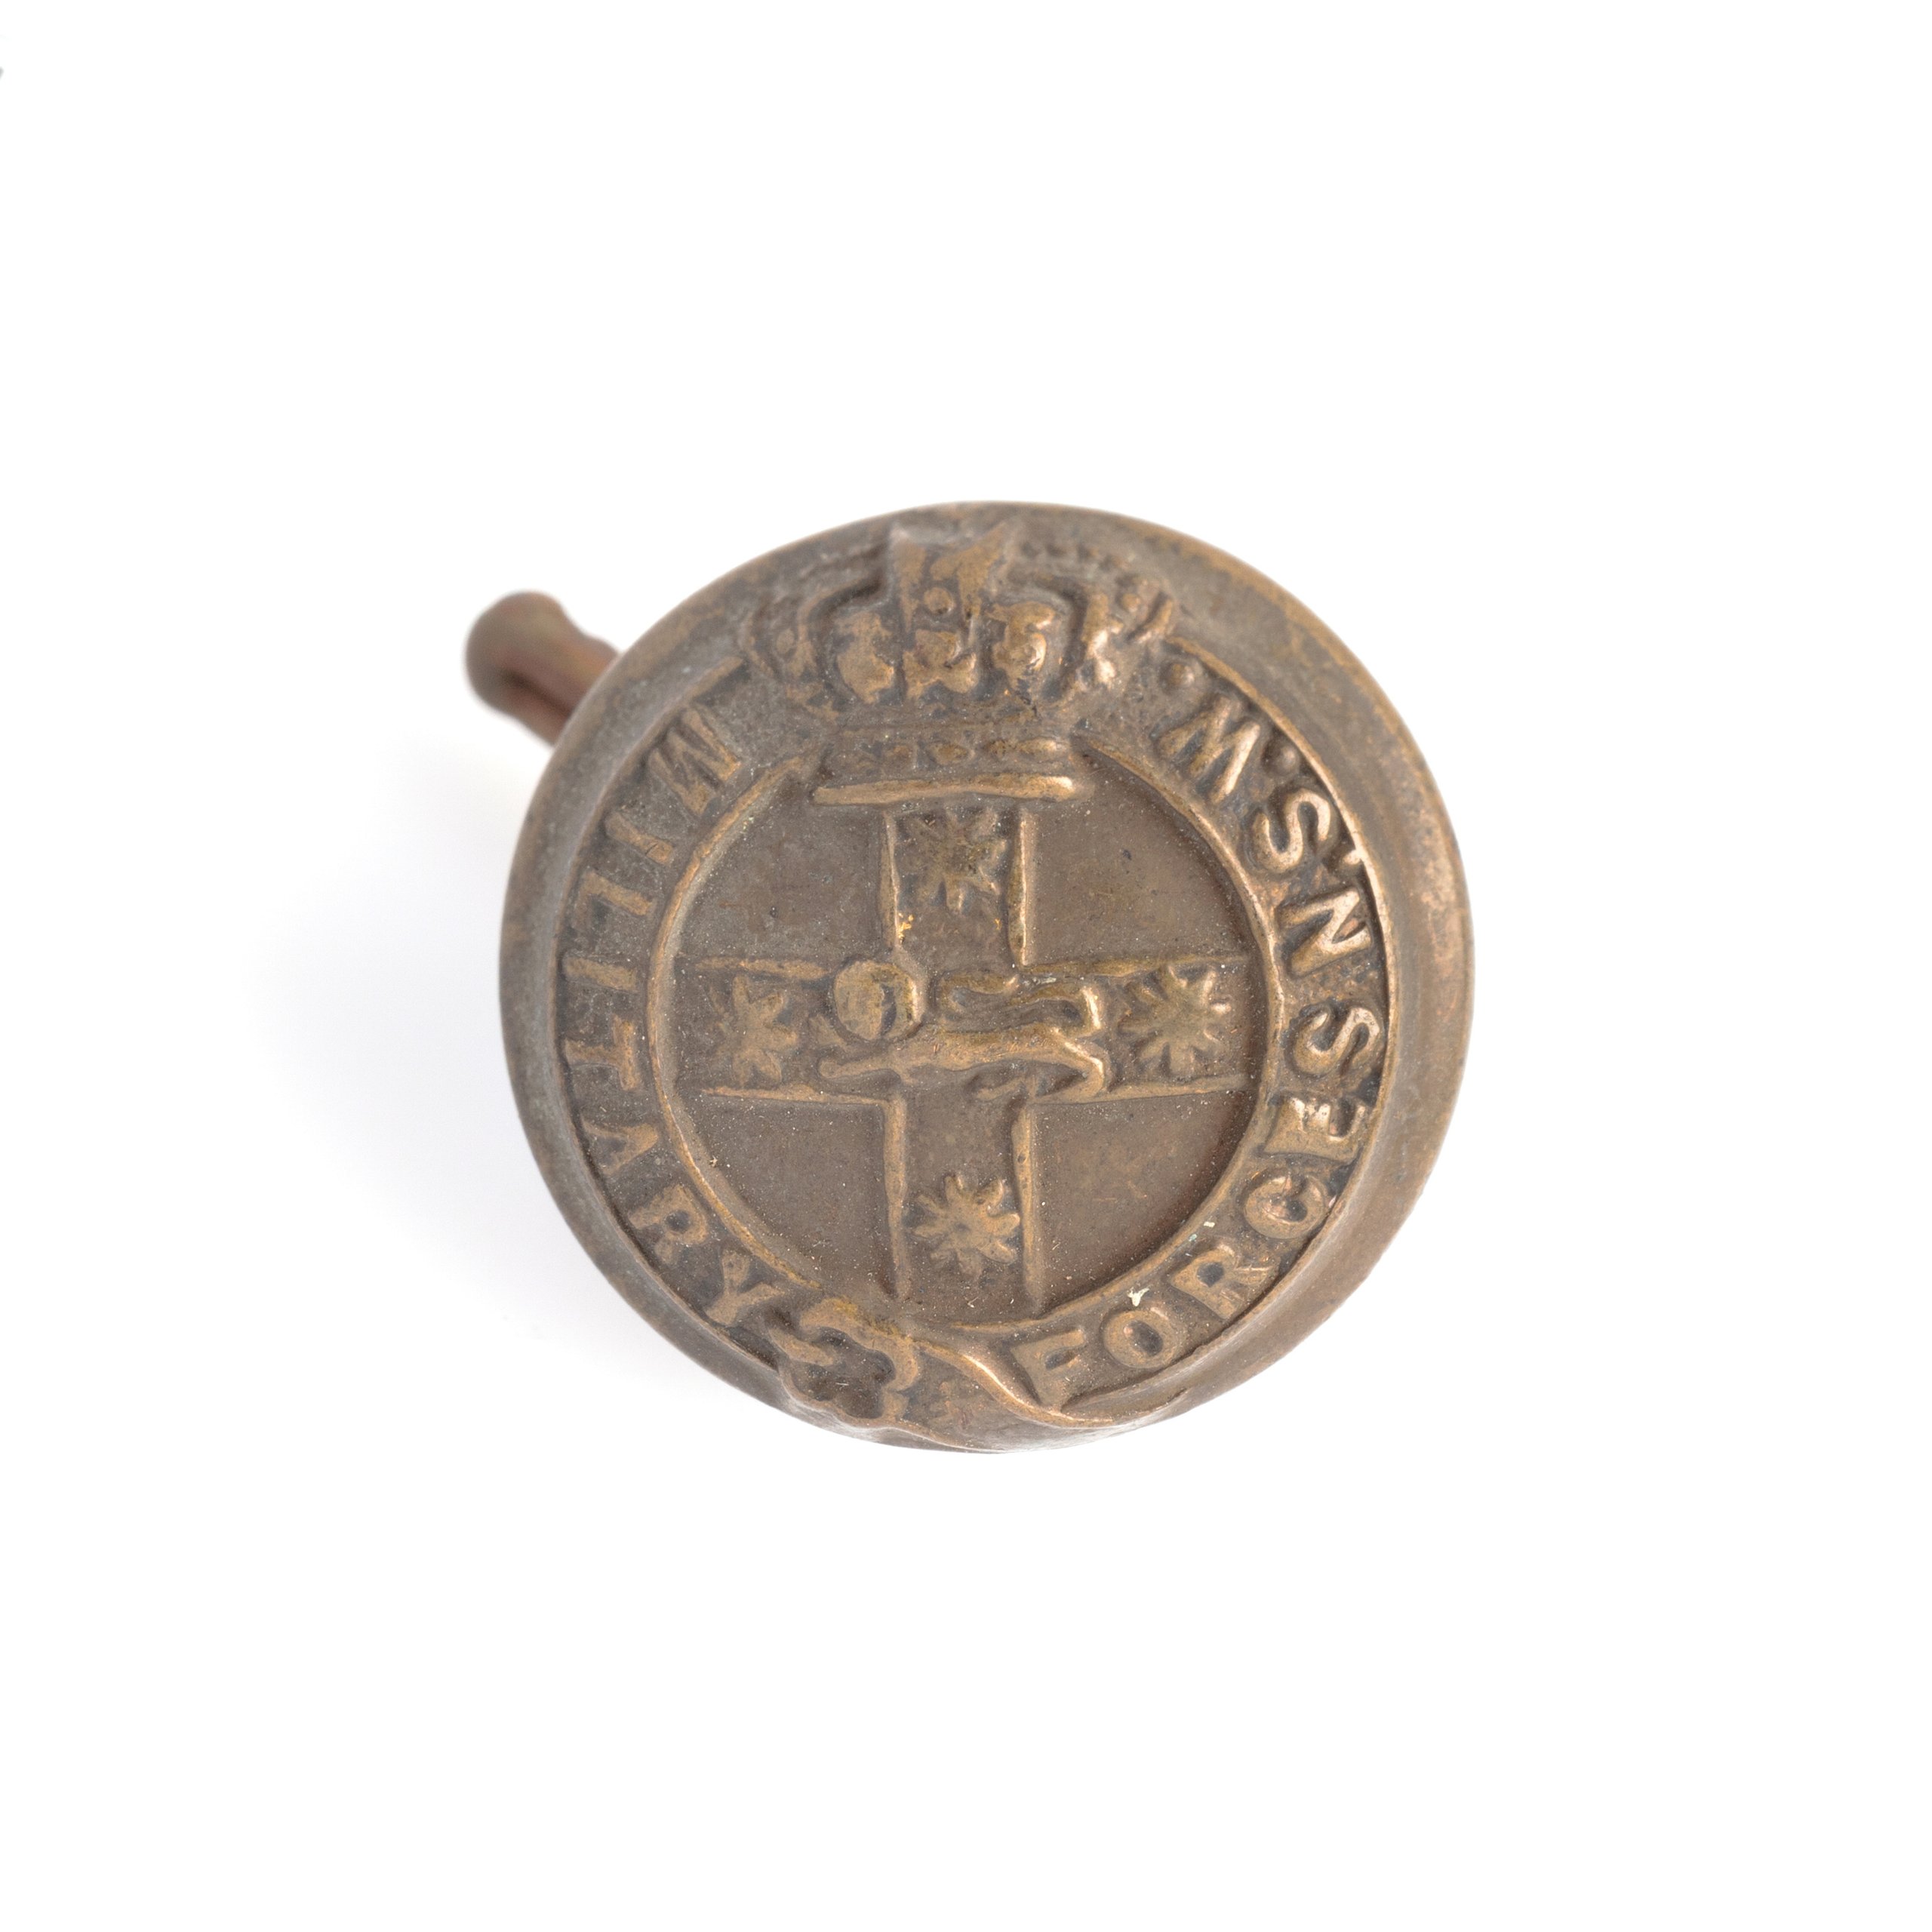 Uniform button issued by NSW Military Forces